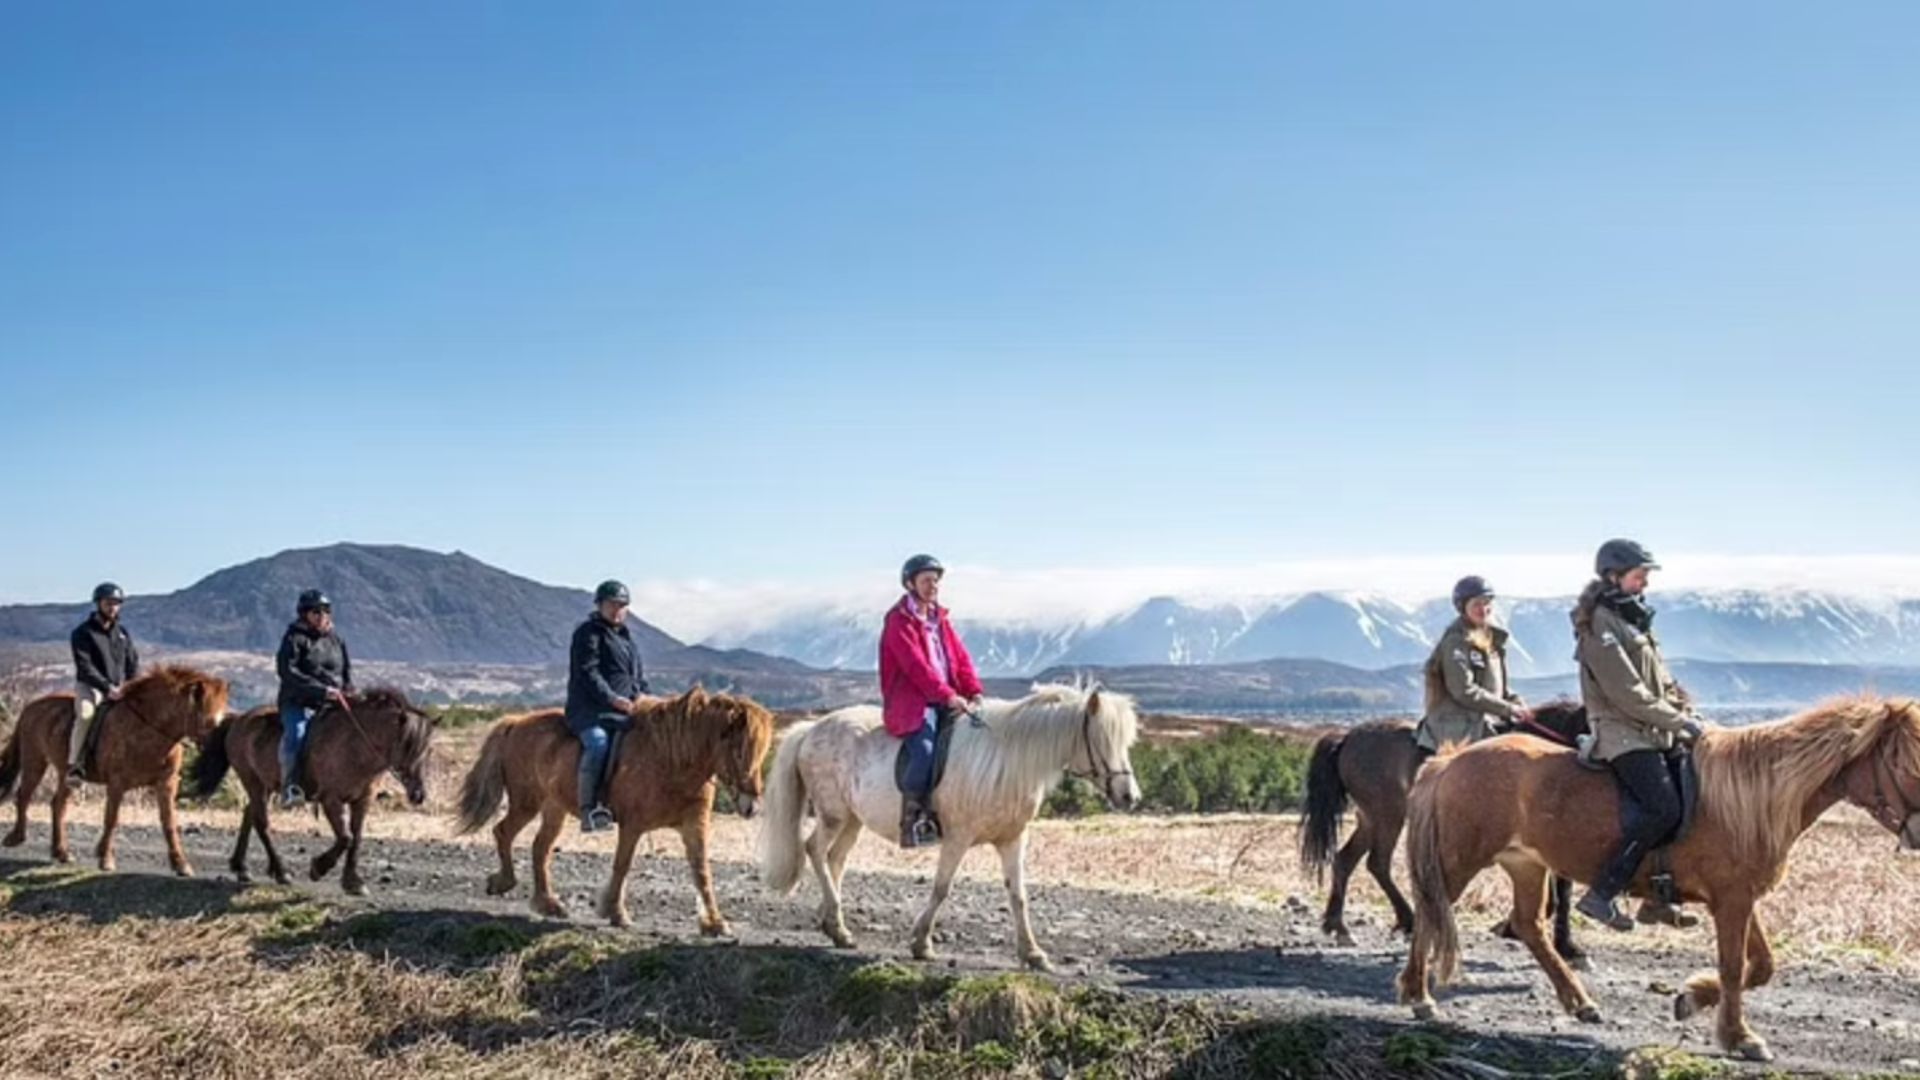 Tourists on horses riding in a line